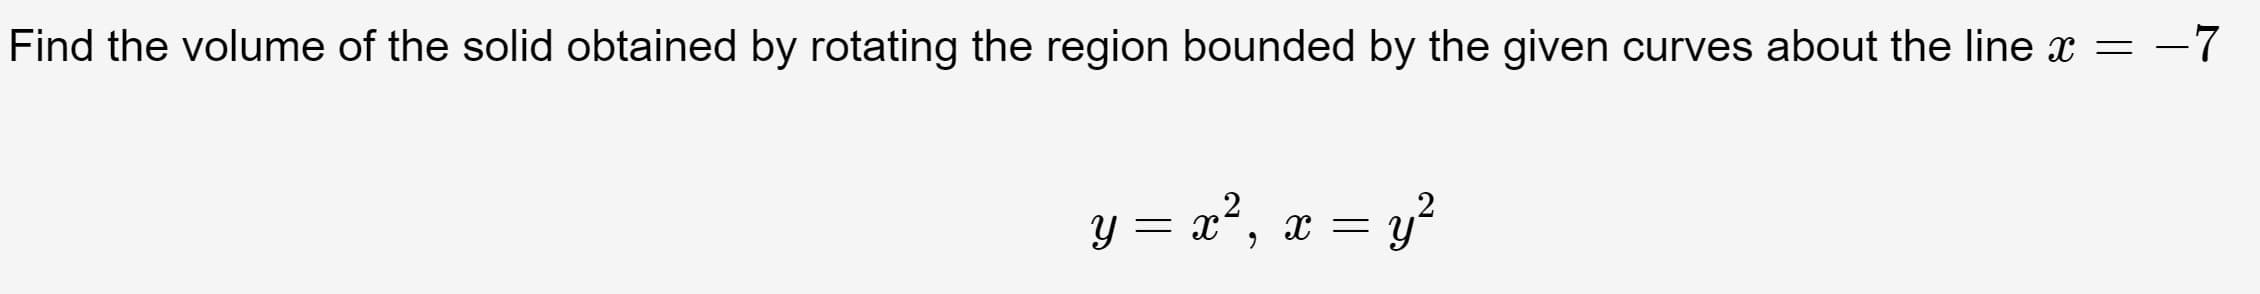 Find the volume of the solid obtained by rotating the region bounded by the given curves about the line x = -7
y = a², x = y²
